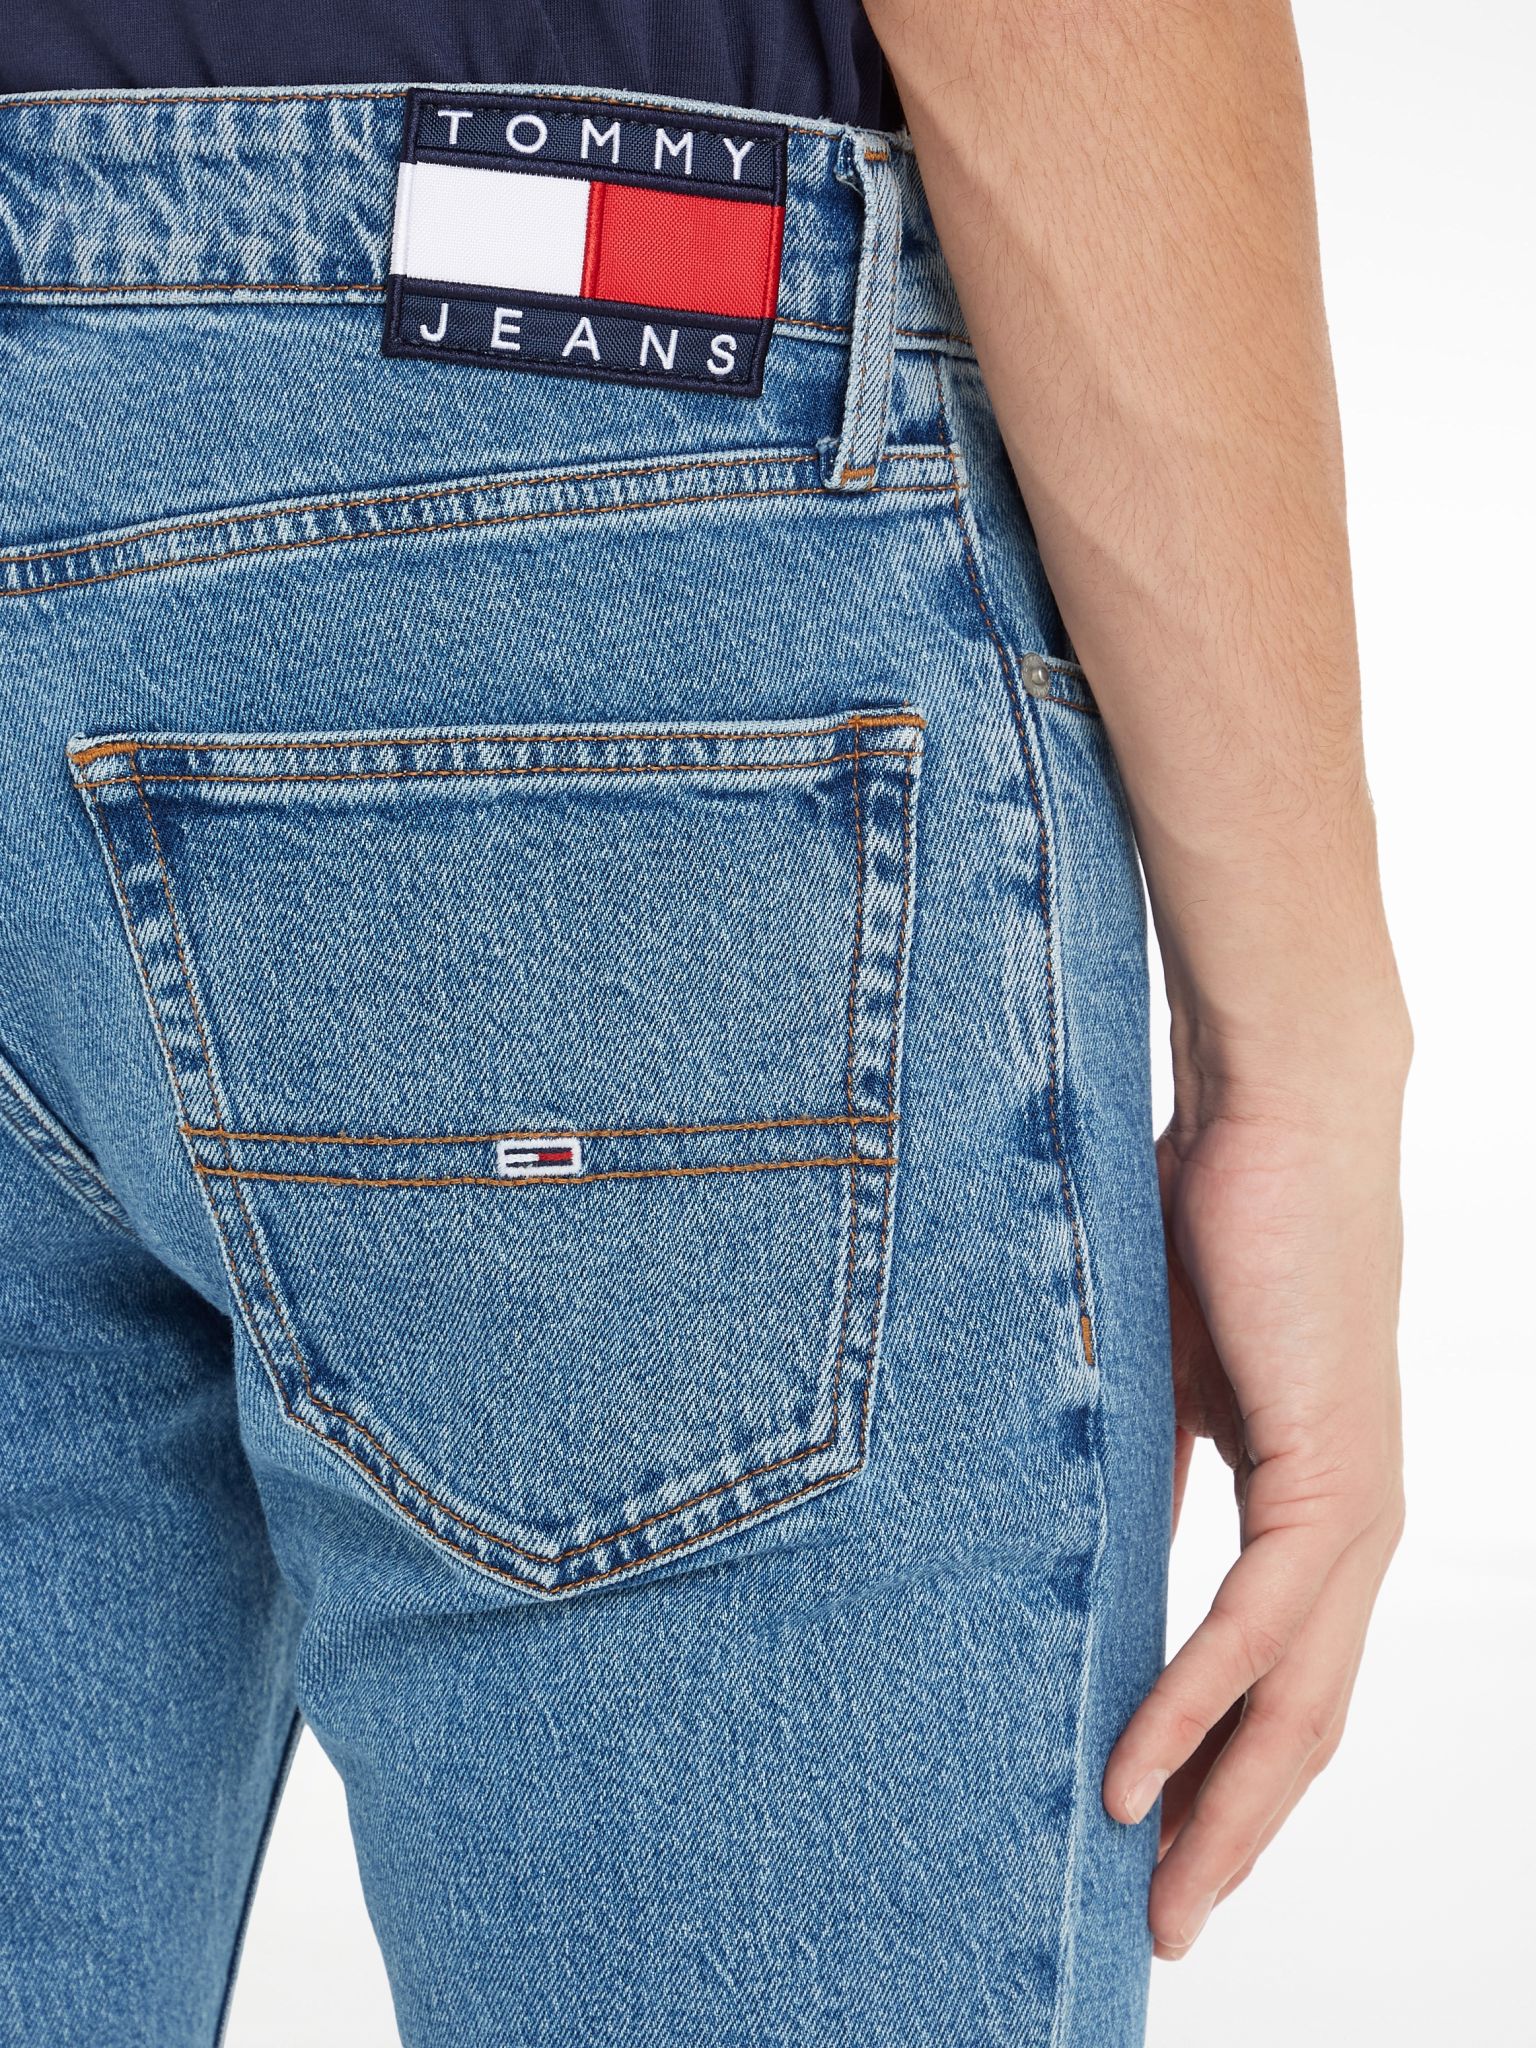 TOMMY JEANS Jeans 10704674